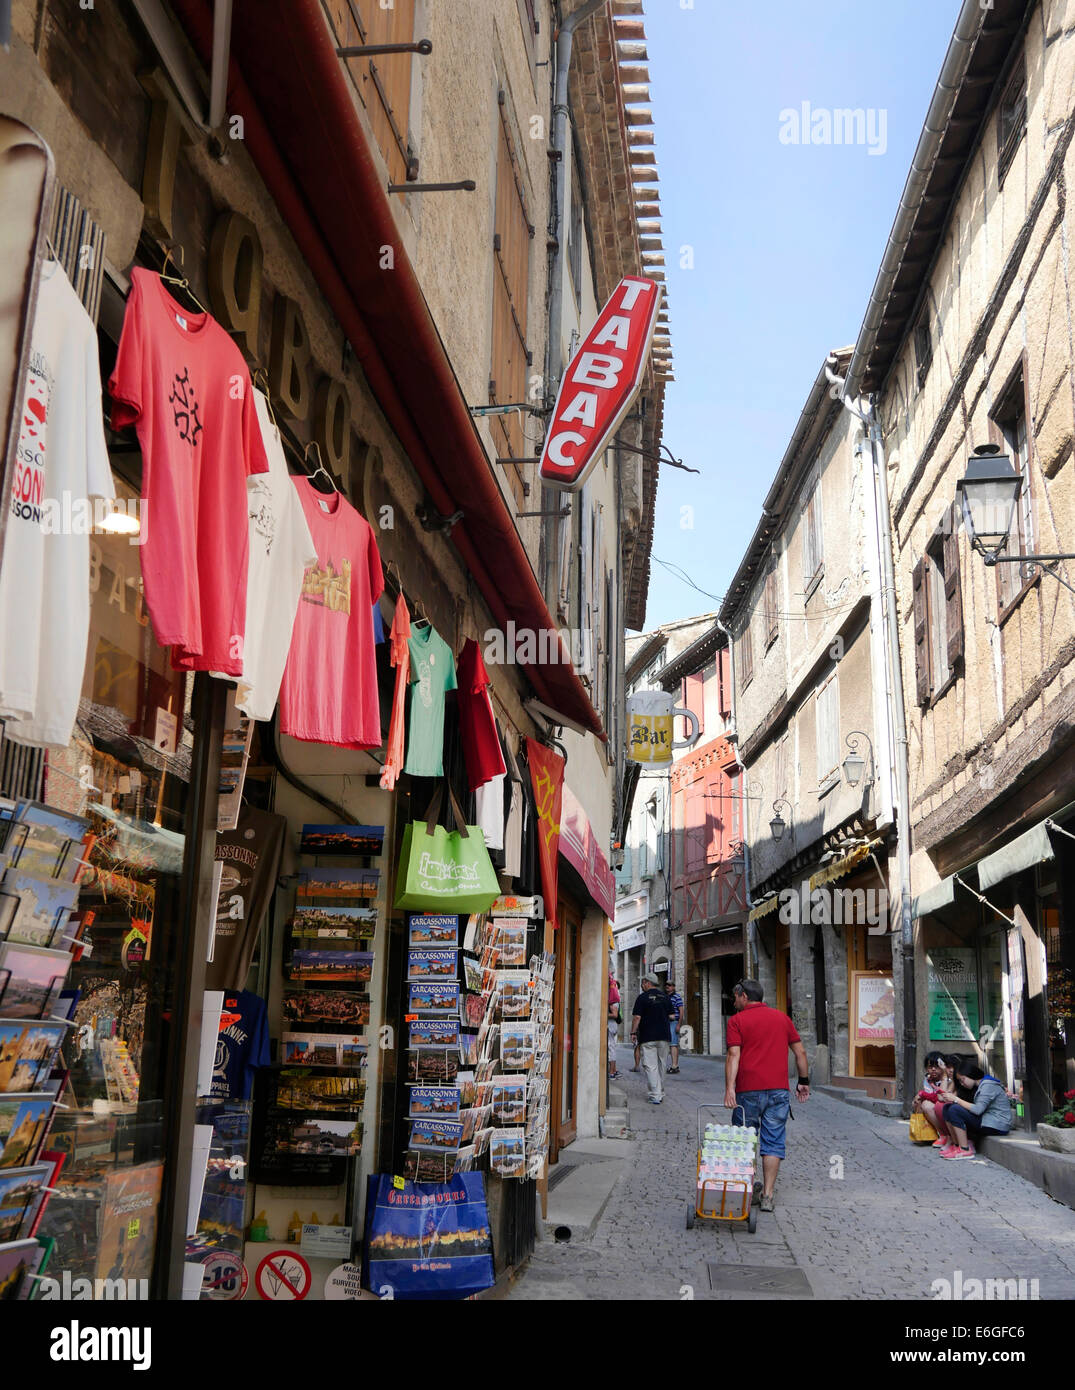 Tee shirts and tobacco for sale in a cobbled back street of Carcassonne, France Stock Photo